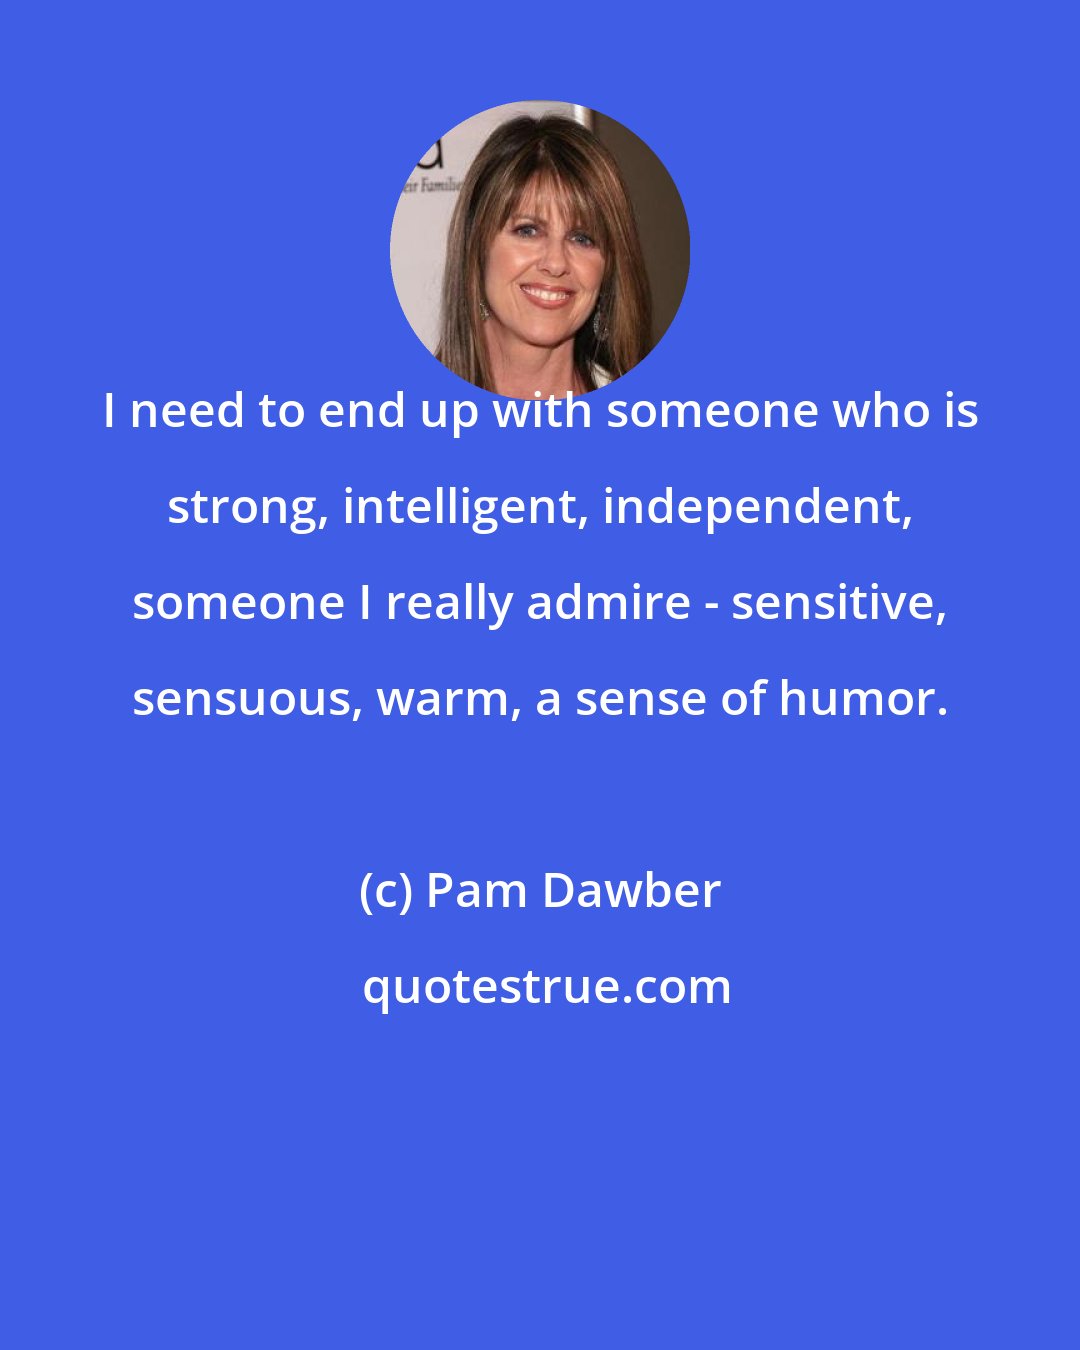 Pam Dawber: I need to end up with someone who is strong, intelligent, independent, someone I really admire - sensitive, sensuous, warm, a sense of humor.